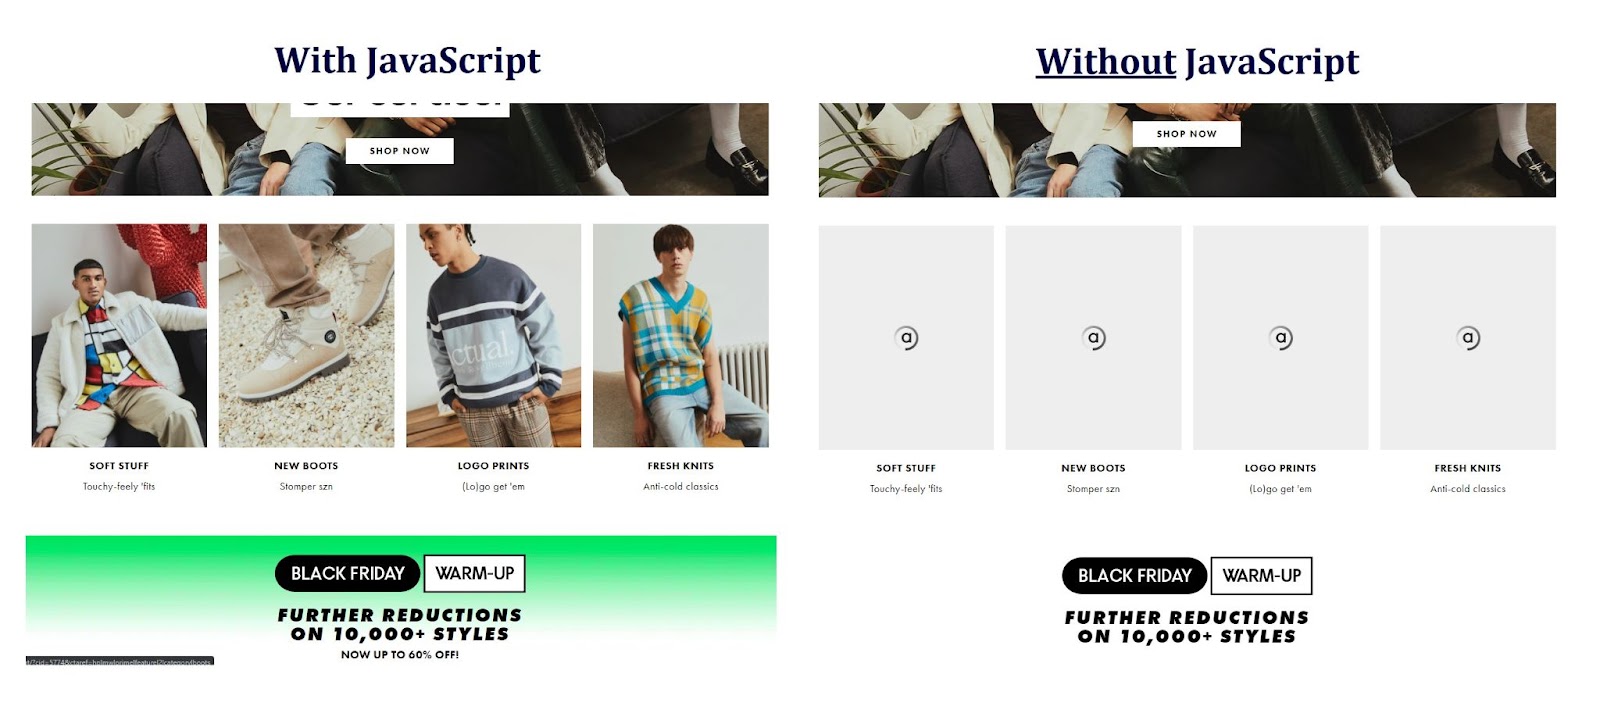 ASOS homepage with and without javascript